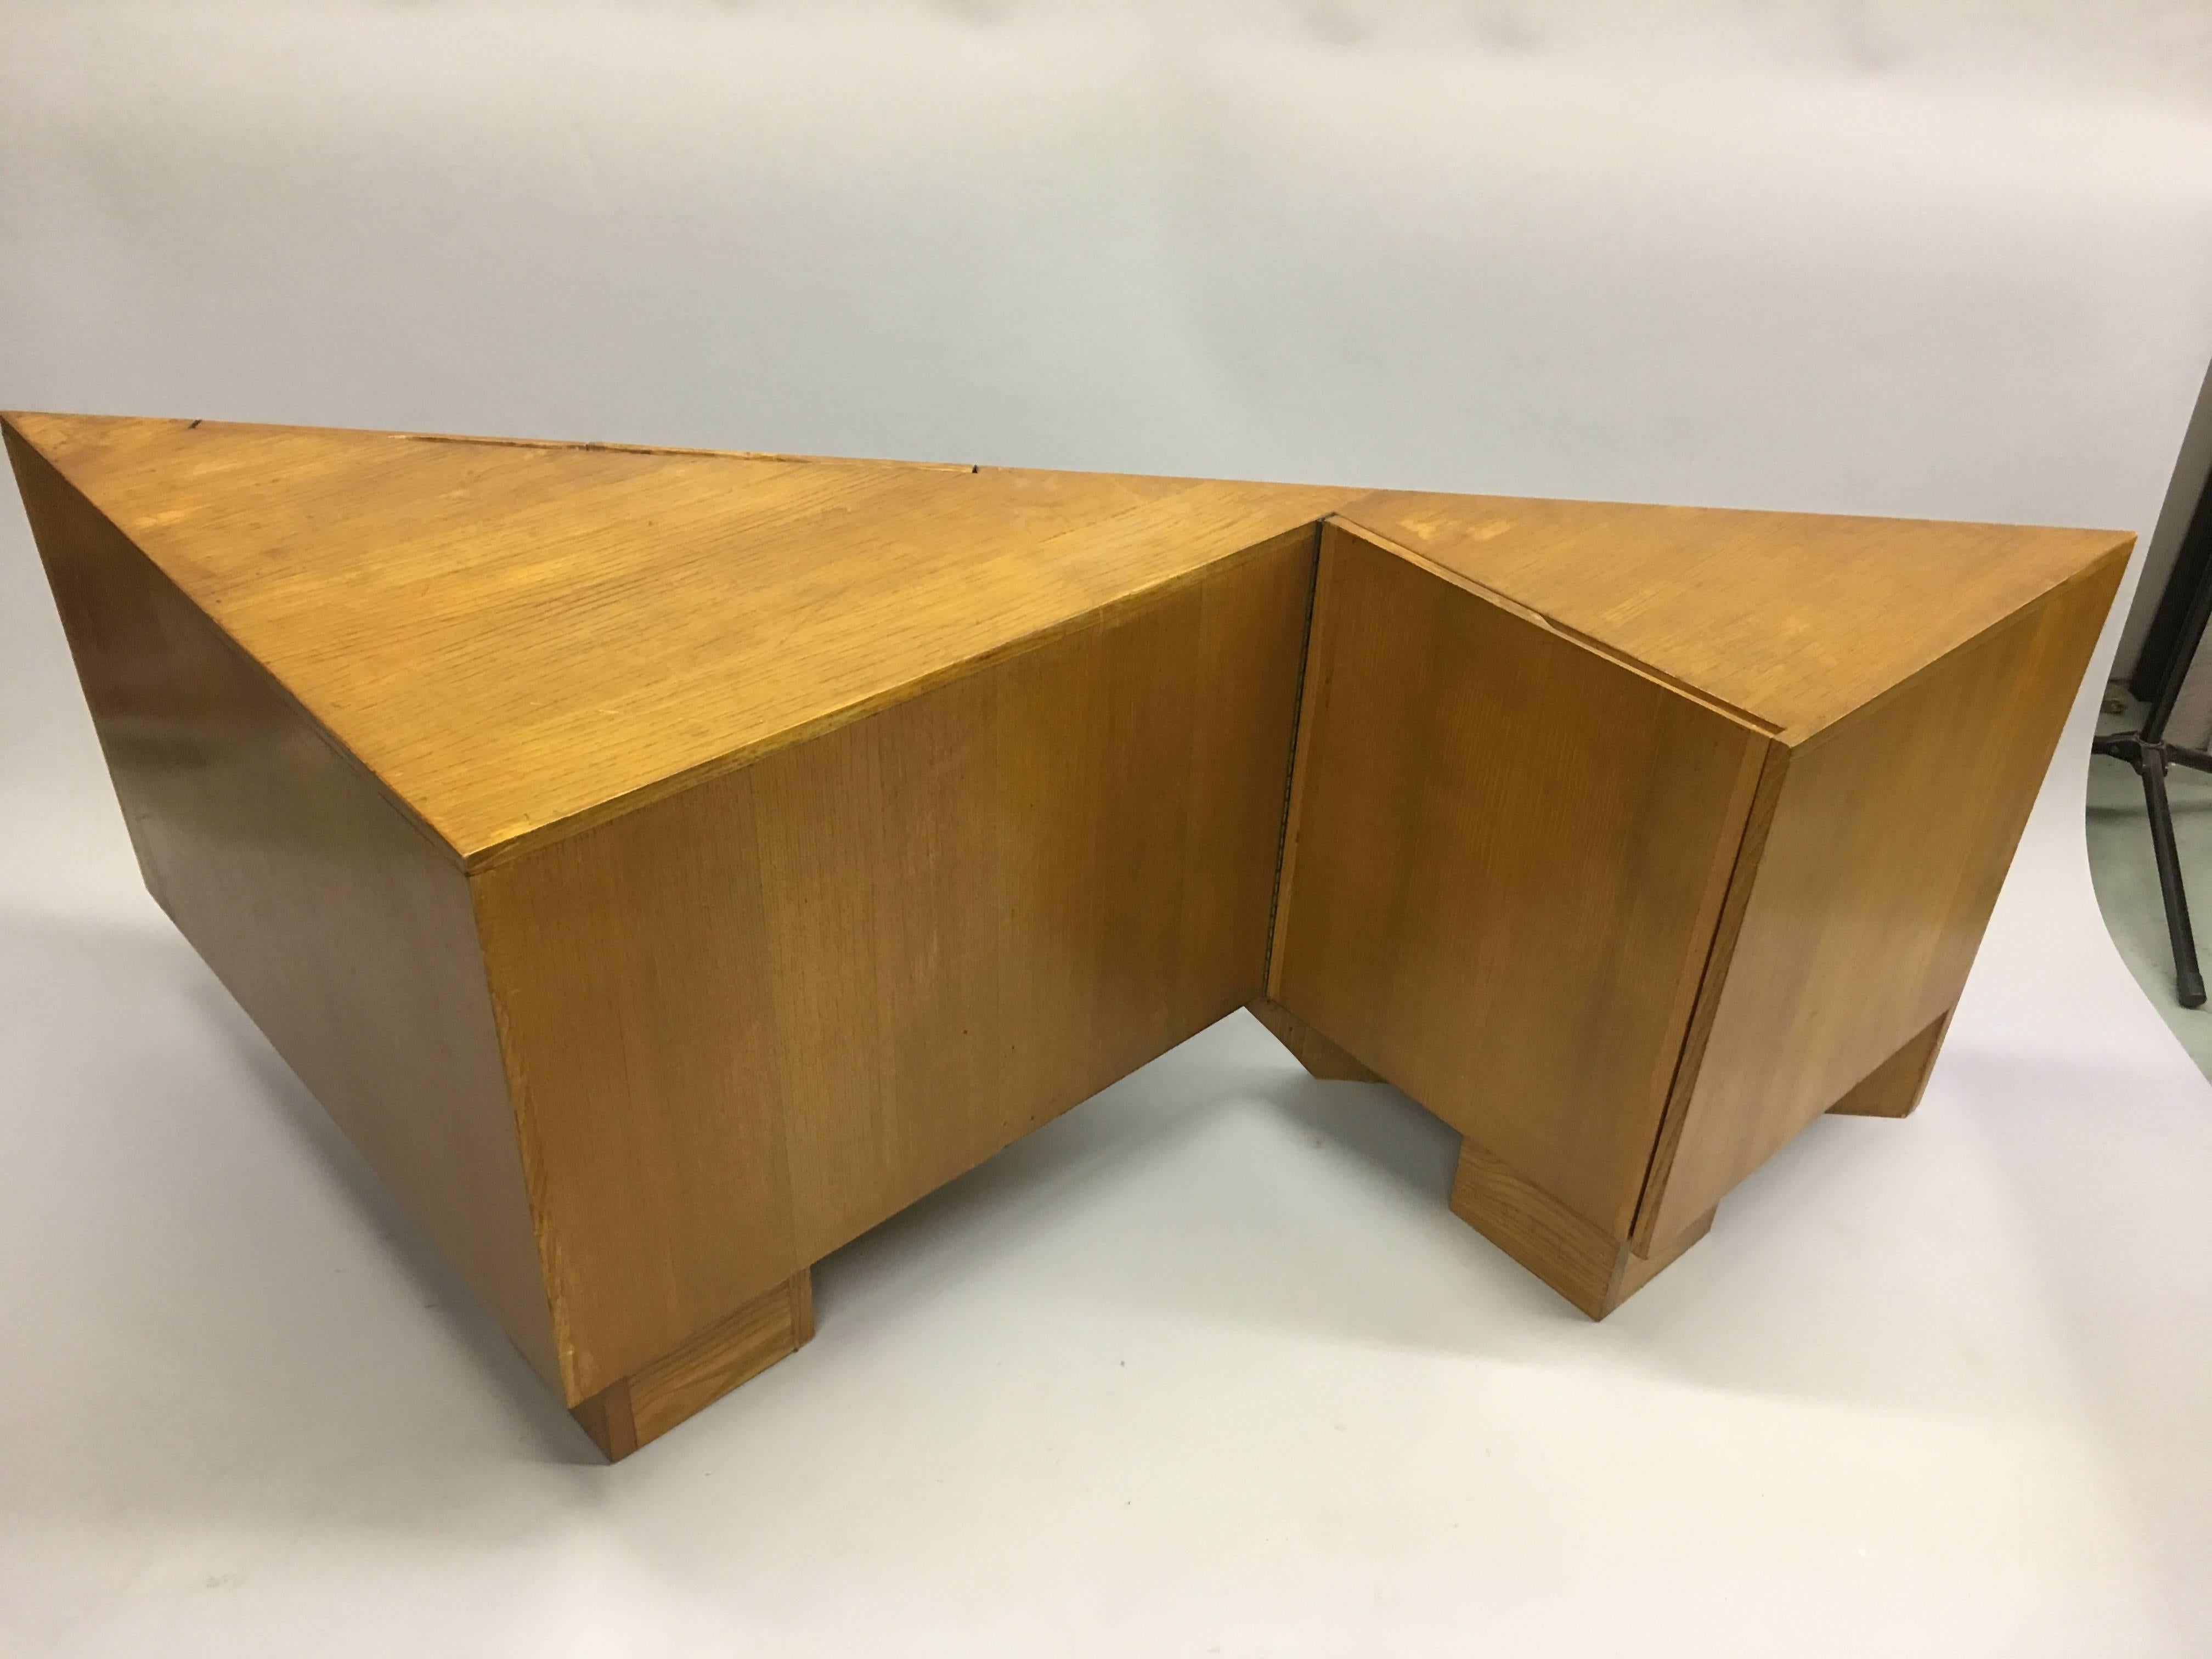 A Unique Mid-Century Modern sideboard, credenza, console or sofa table in plywood by French Modernist architect, Alain Marcoz for his own home in Paris.

The piece is a stunning work of design and architecture with the main body cantilevered over